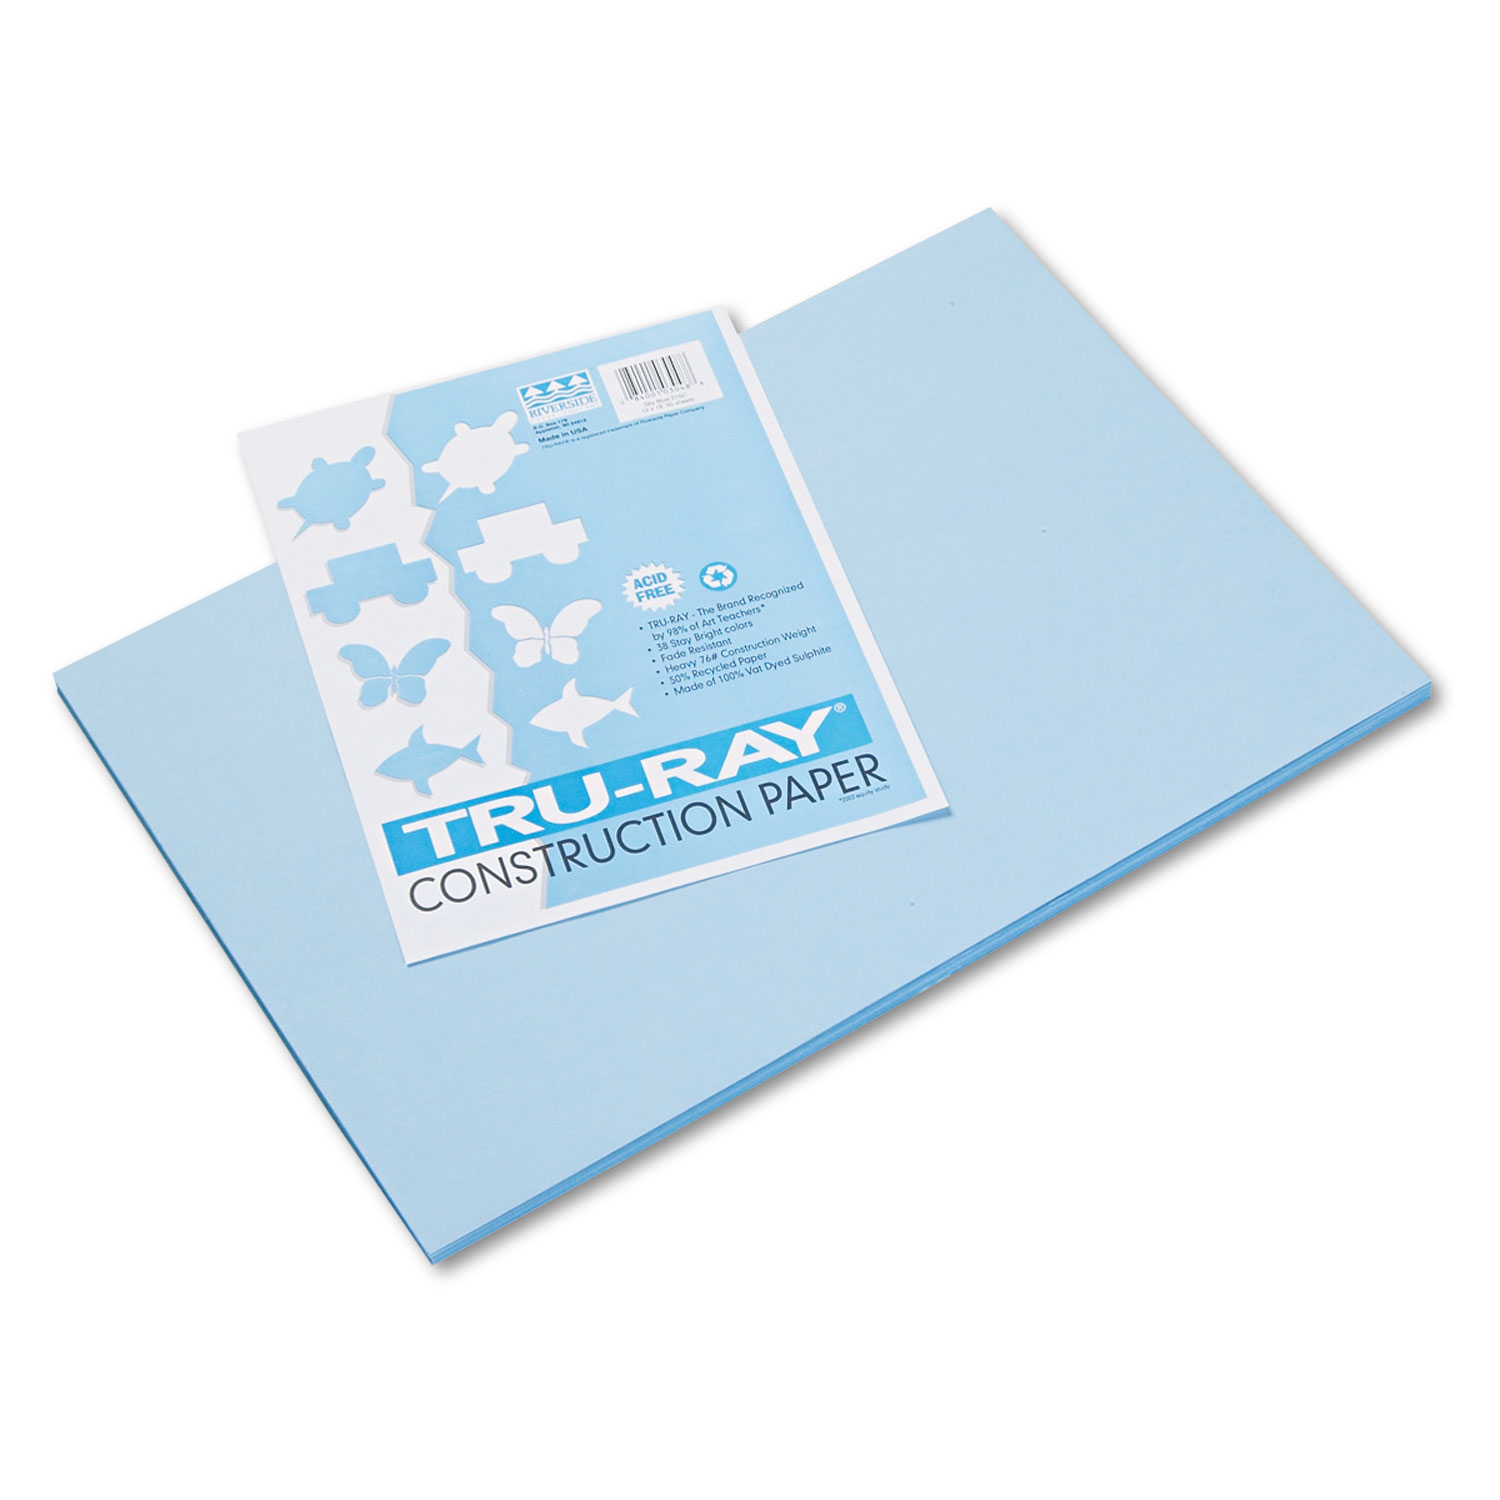 Tru-Ray Construction Paper, 76 lbs., 12 x 18, Sky Blue, 50 Sheets/Pack